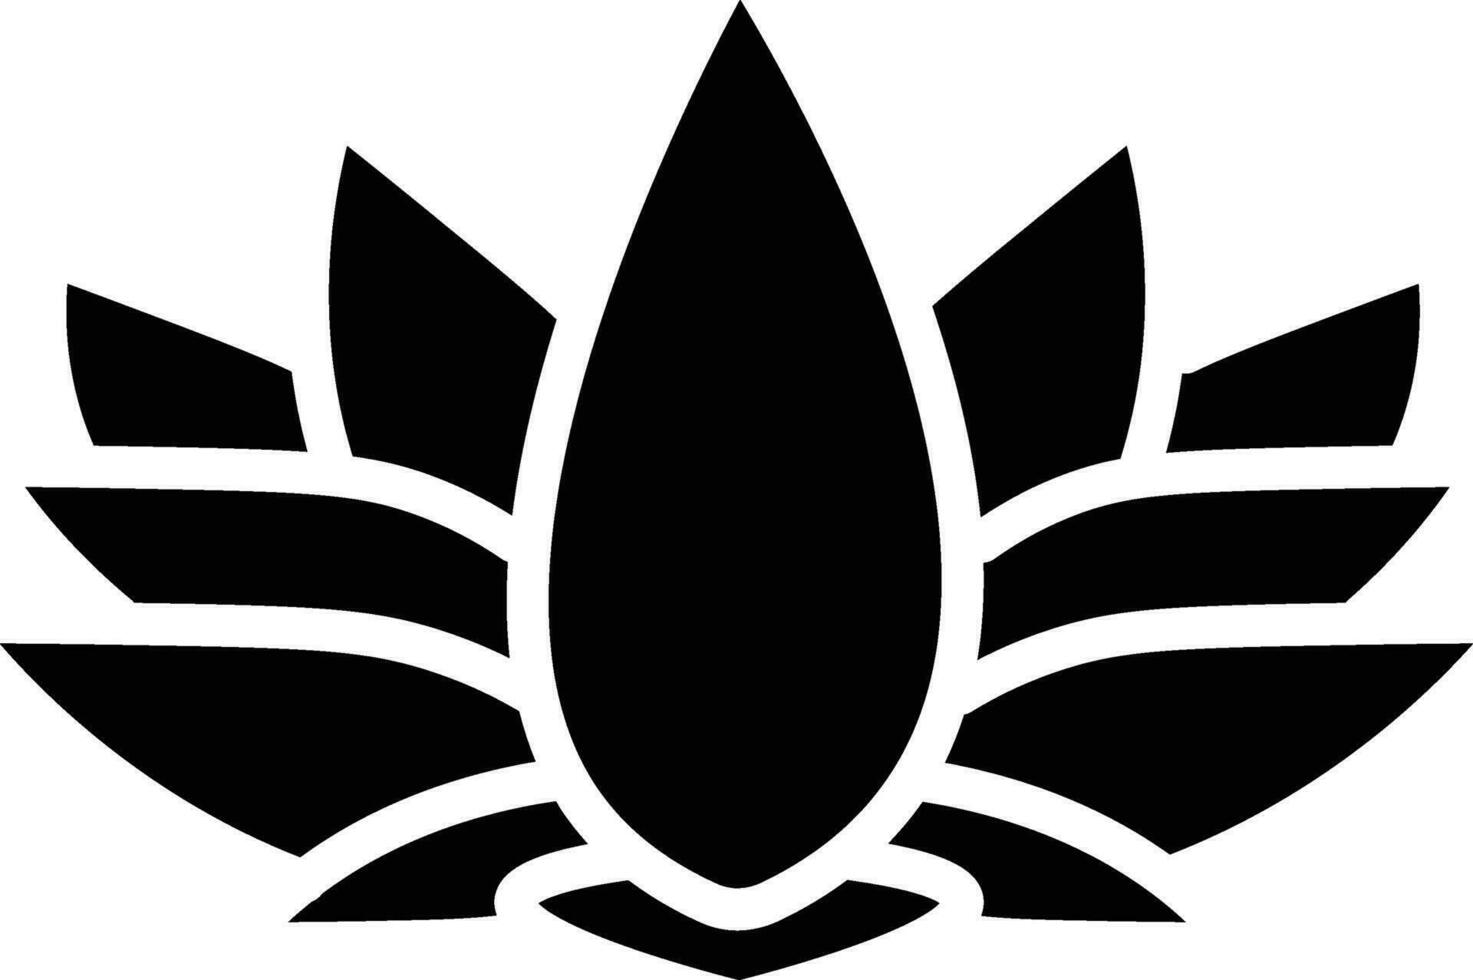 Glyph Lotus Flower Icon in Flat Style. vector